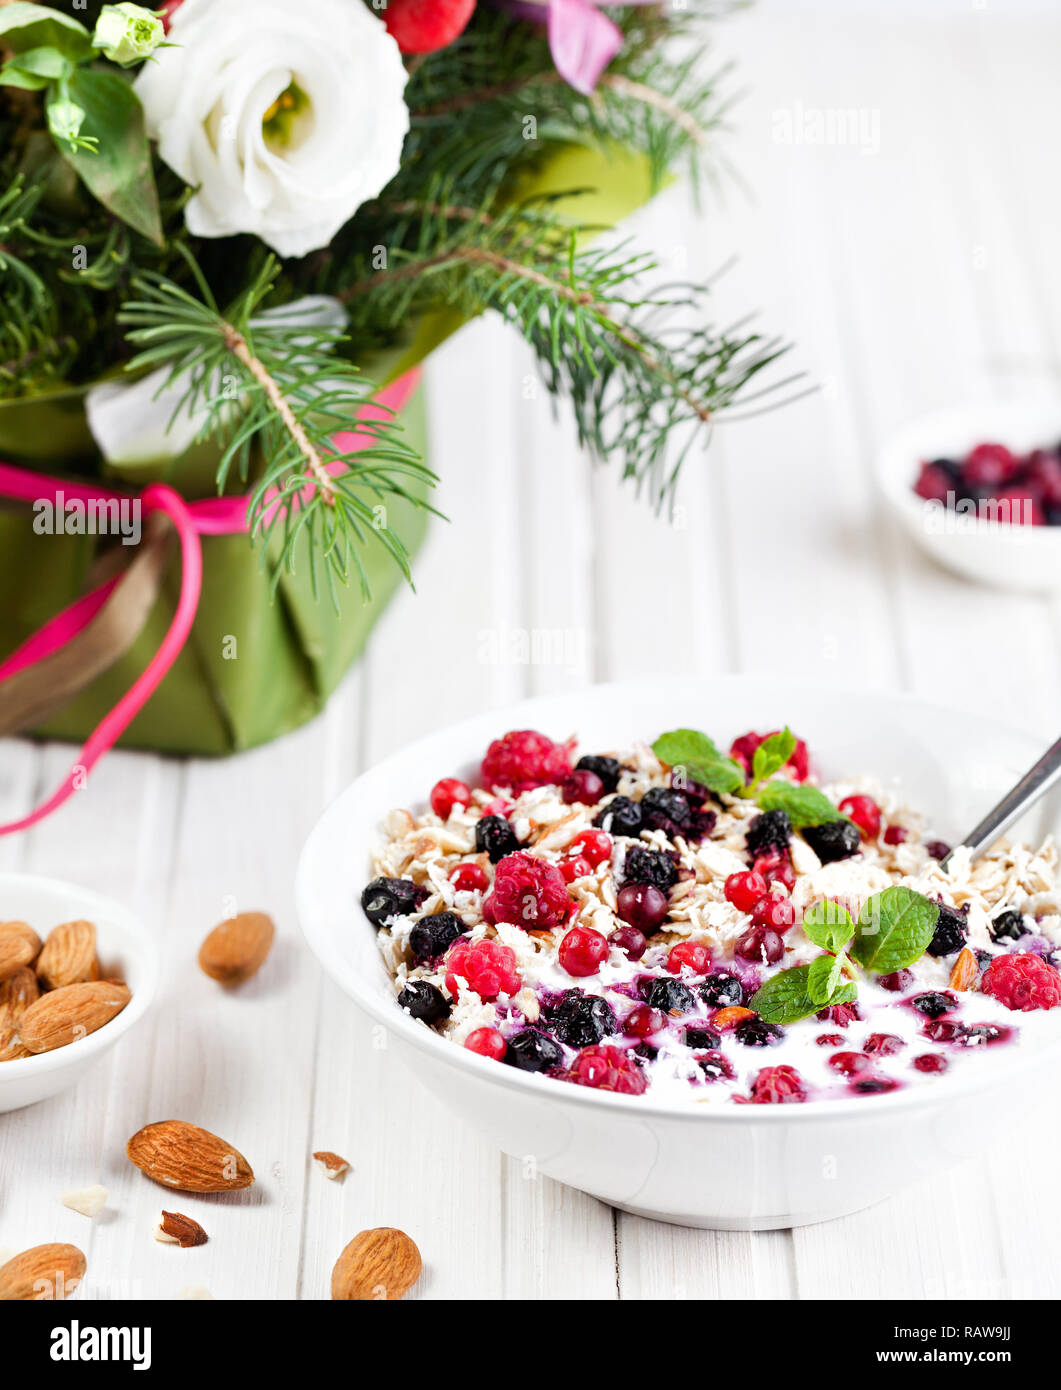 Bowl with oats, berries and almond near winter flower bouquet on wooden white background Stock Photo